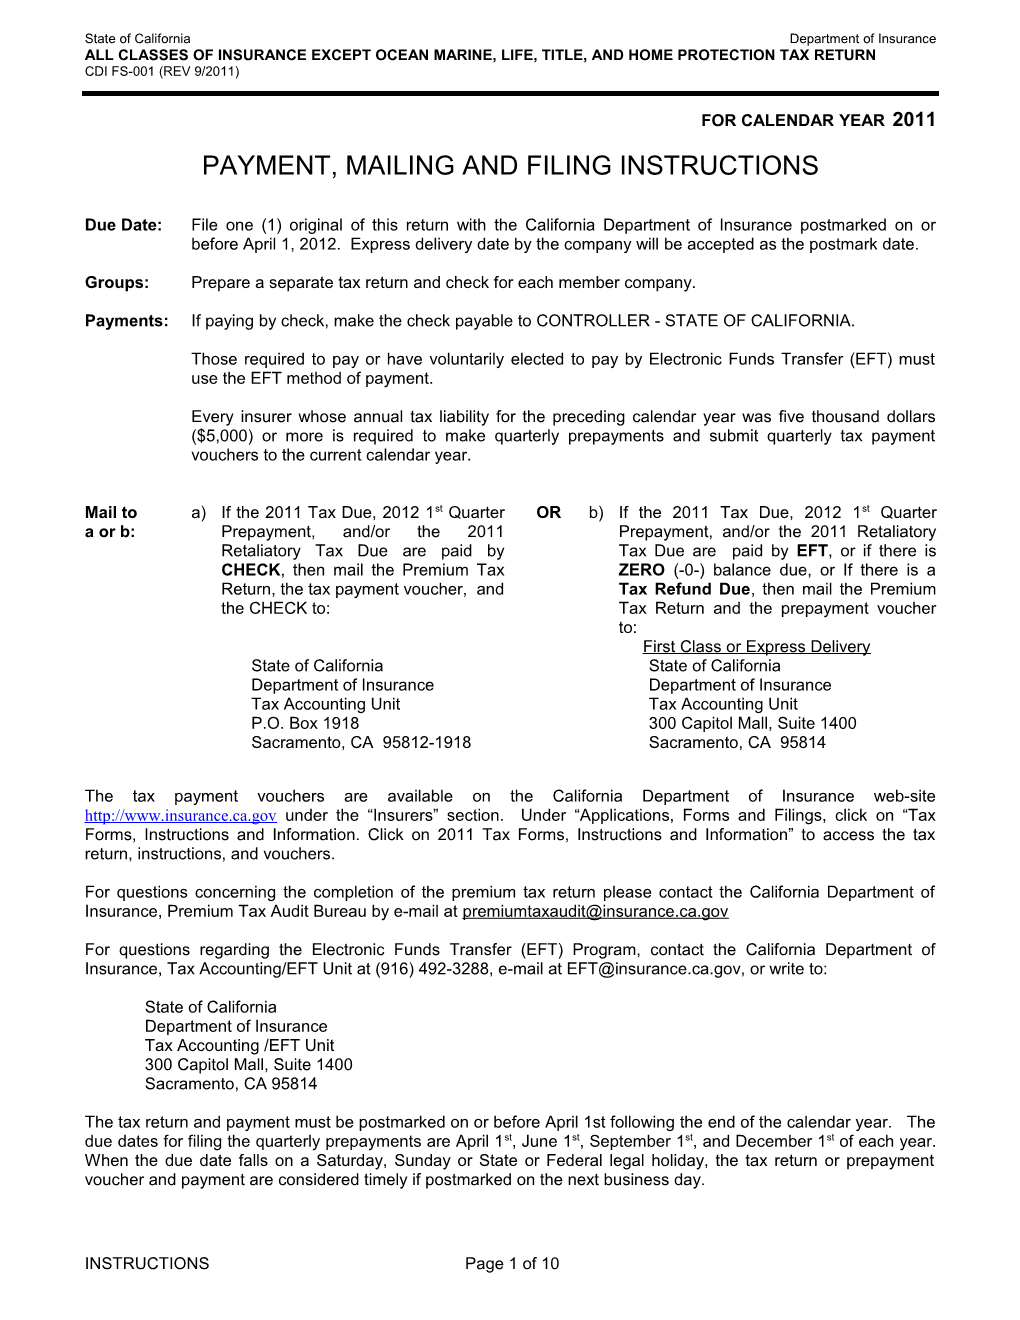 Payment, Mailing and Filing Instructions